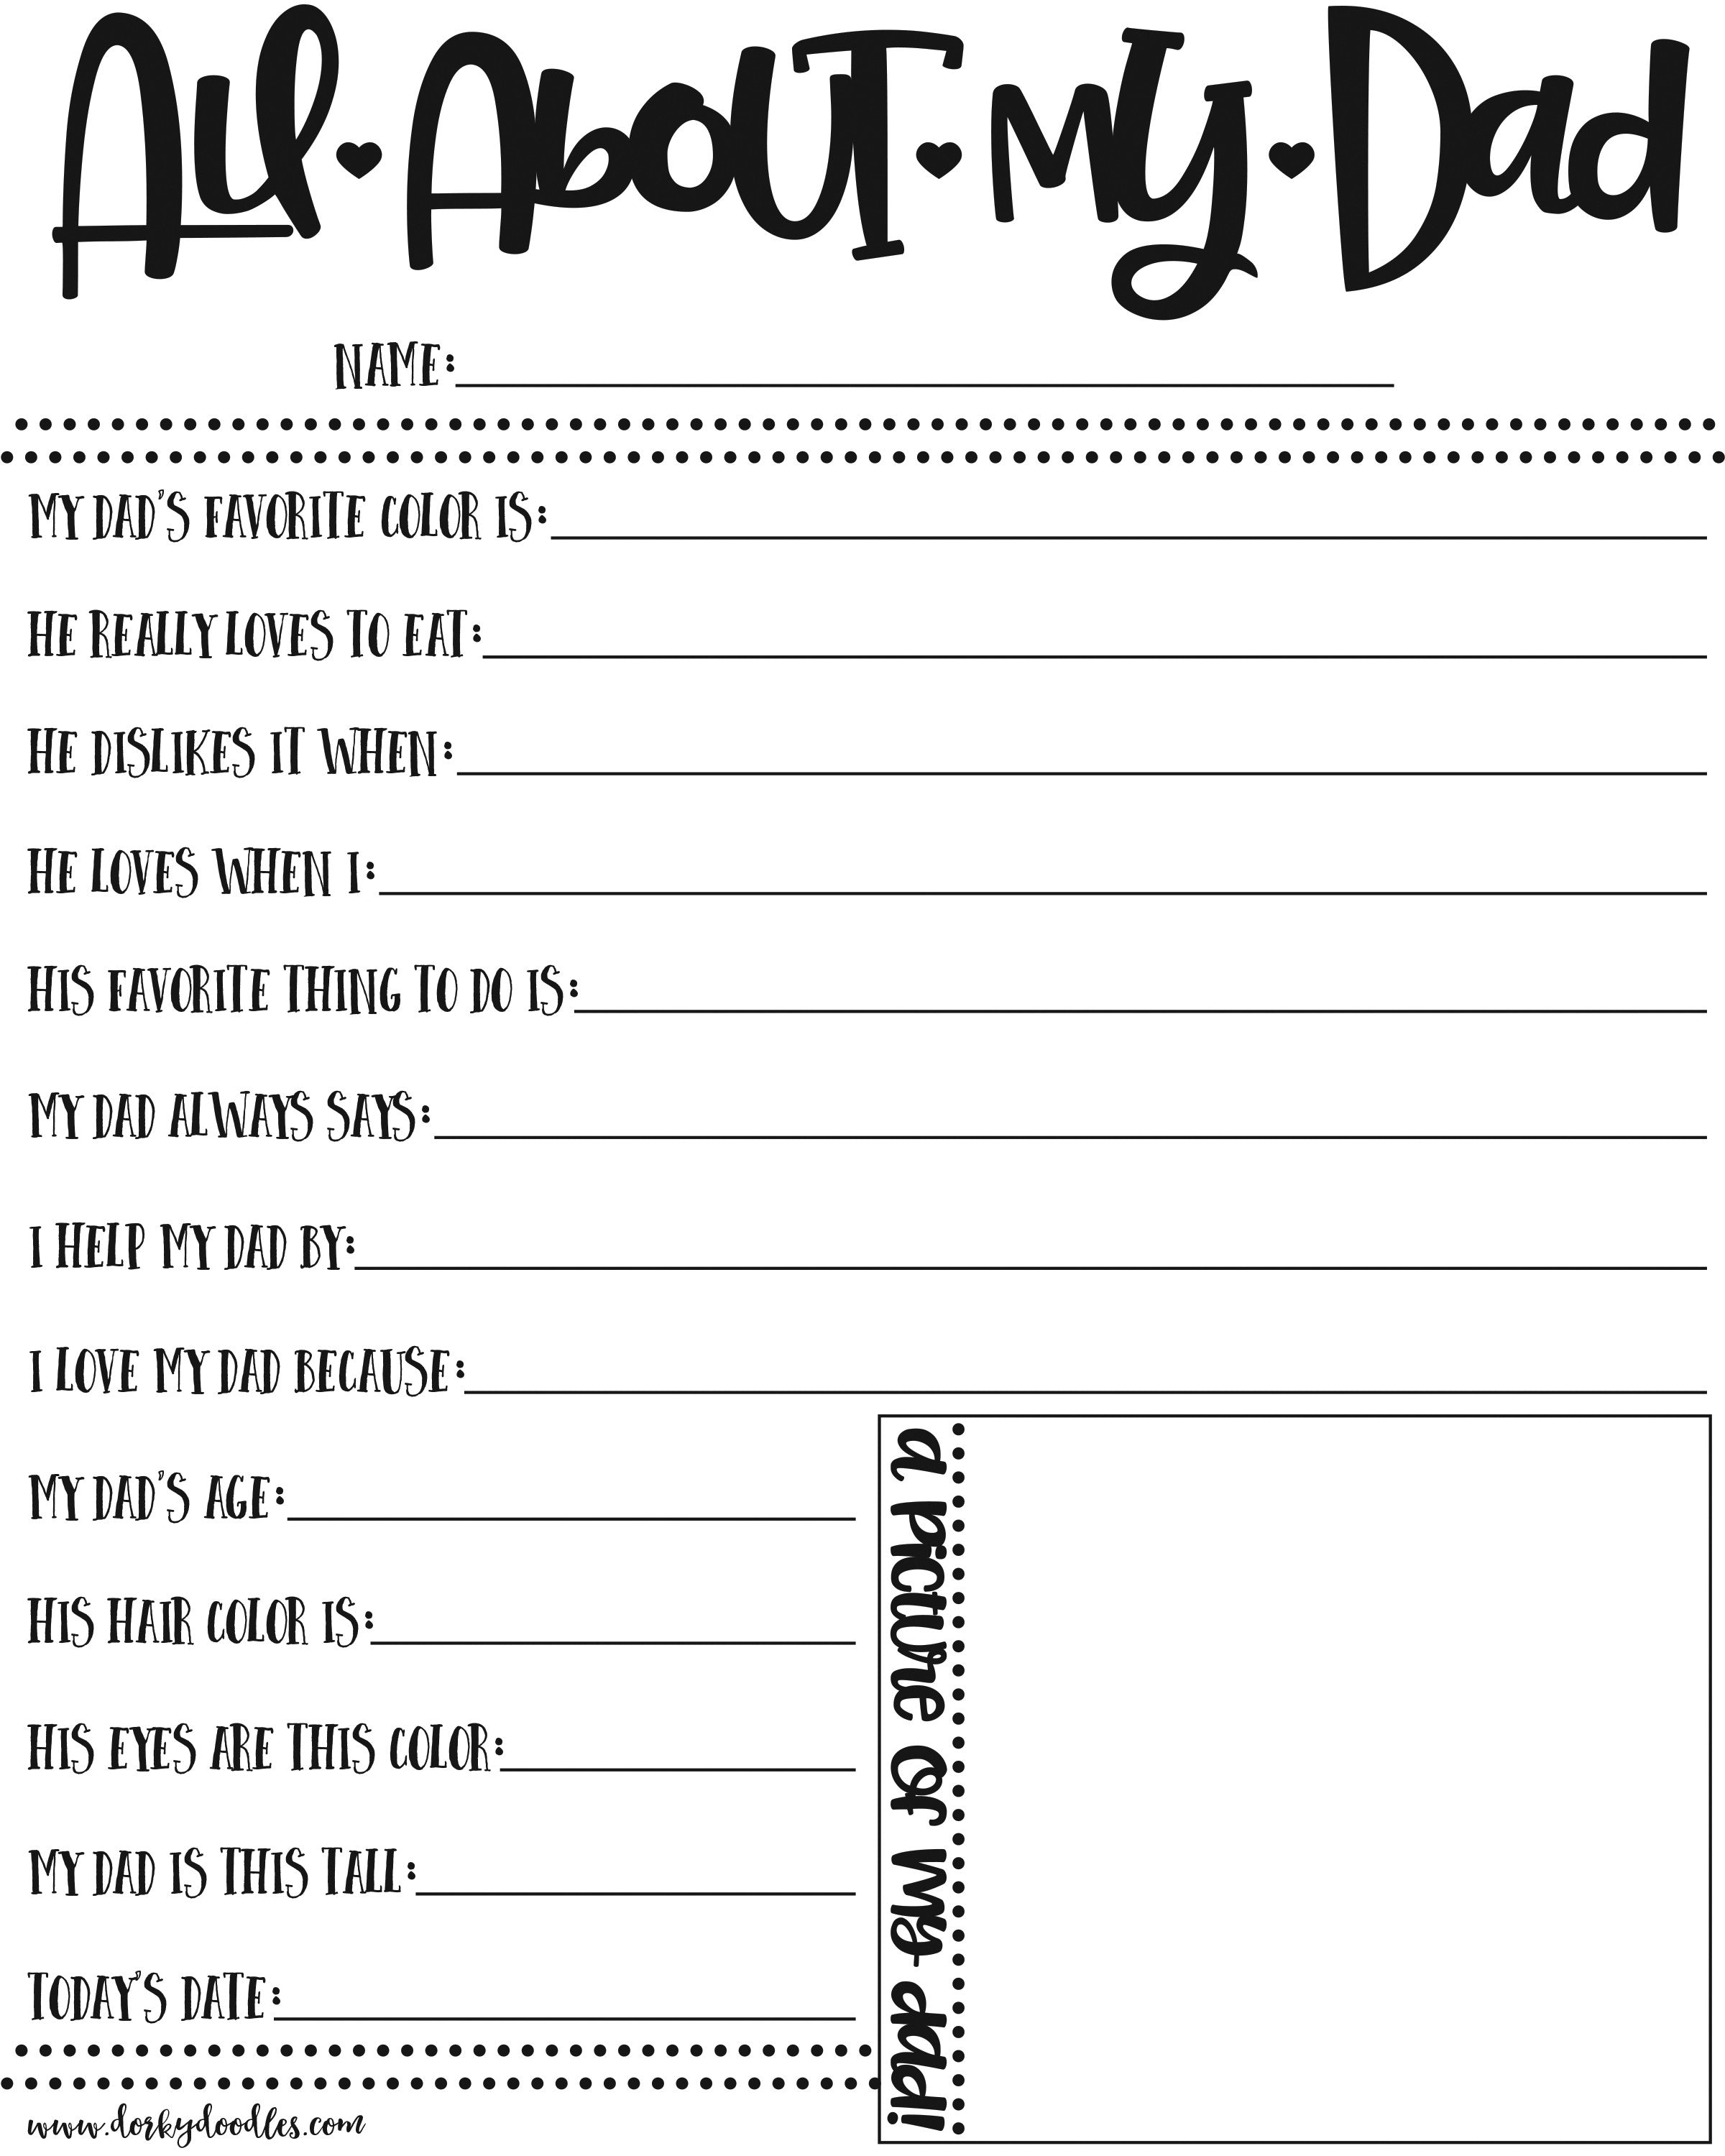 father-s-day-quiz-printable-dorky-doodles